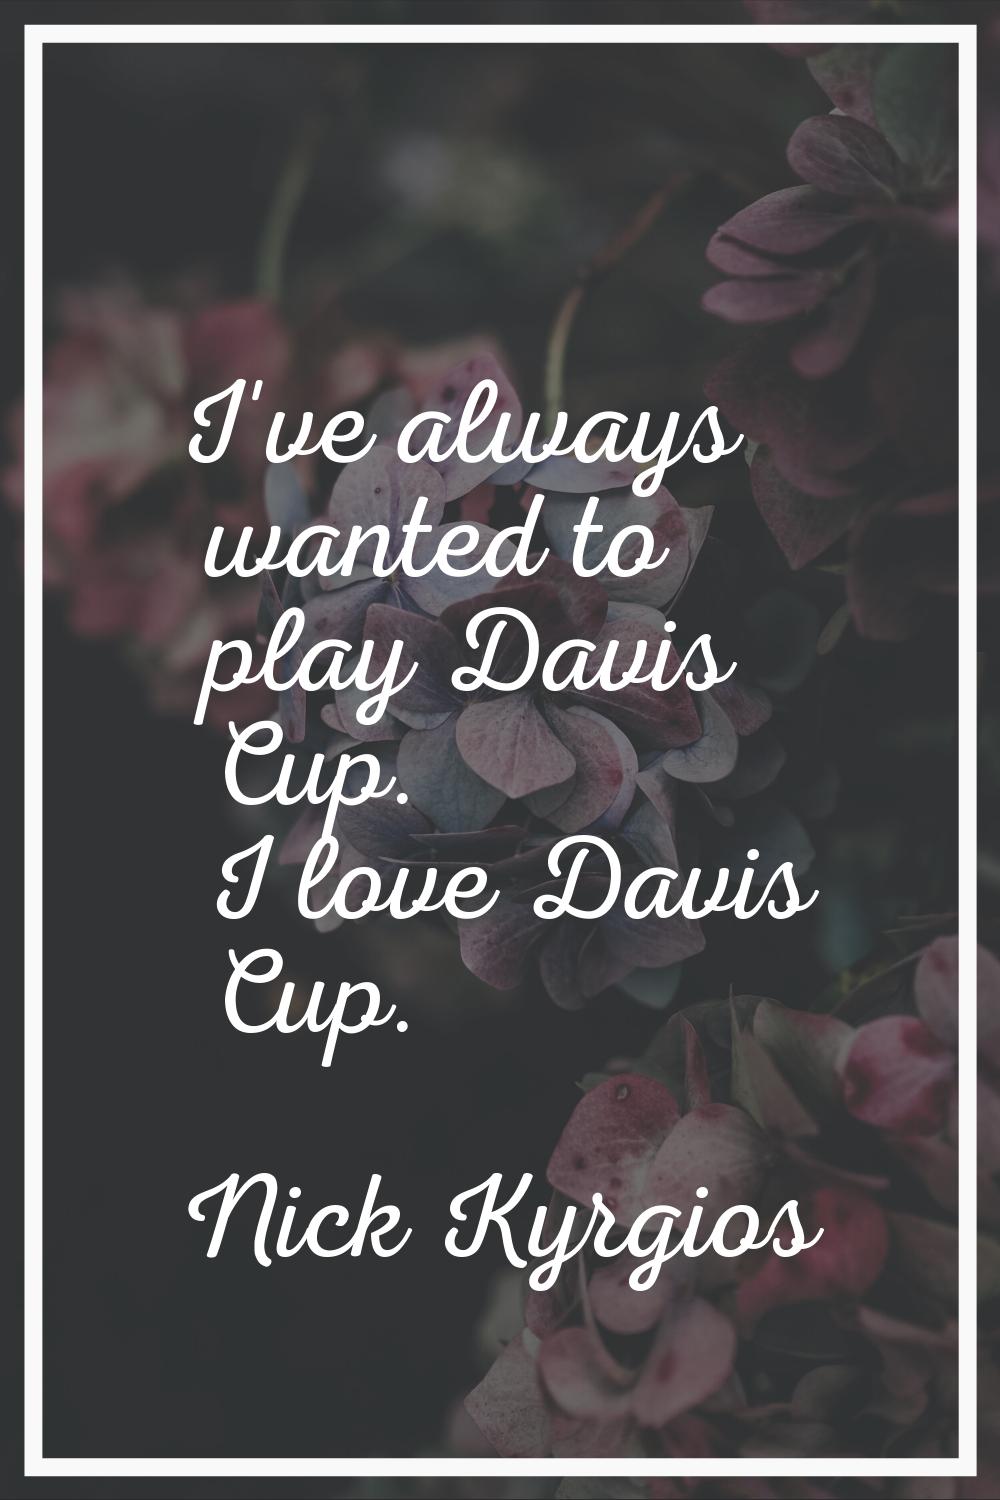 I've always wanted to play Davis Cup. I love Davis Cup.